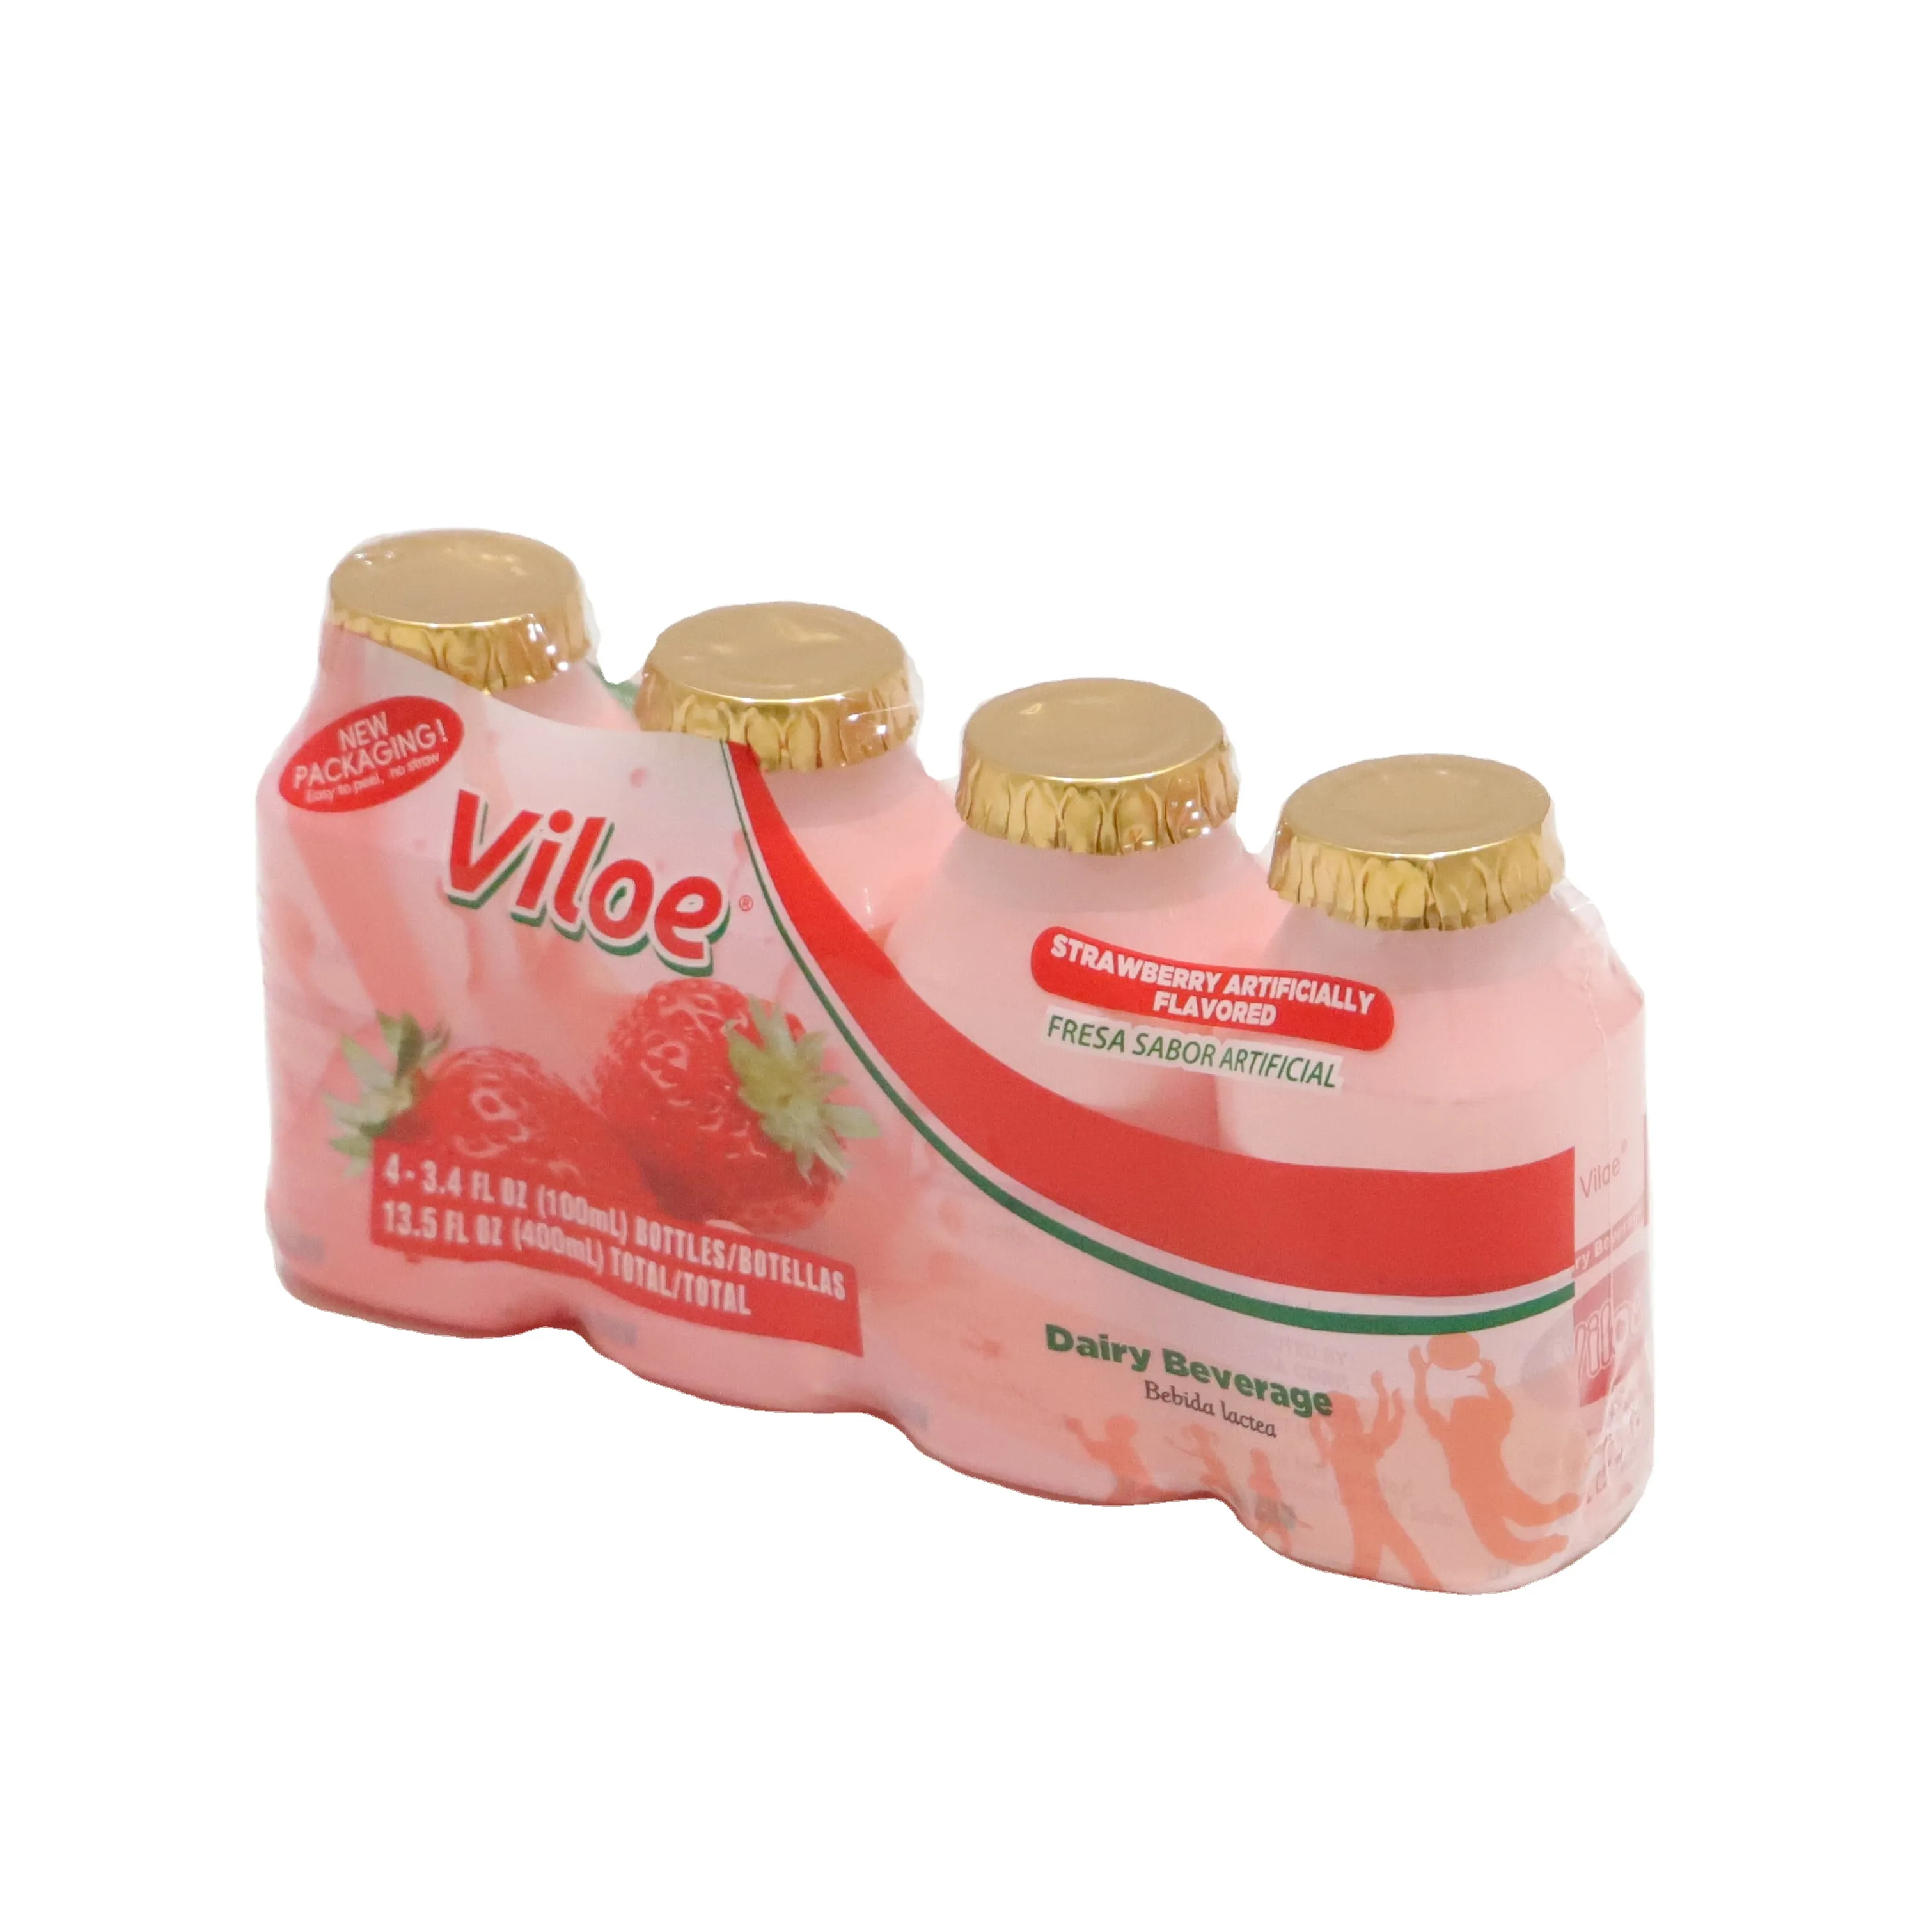 Viloe Soft Drinks about Strawberry Flavored Saturated Fat Free and Trans Fat Free